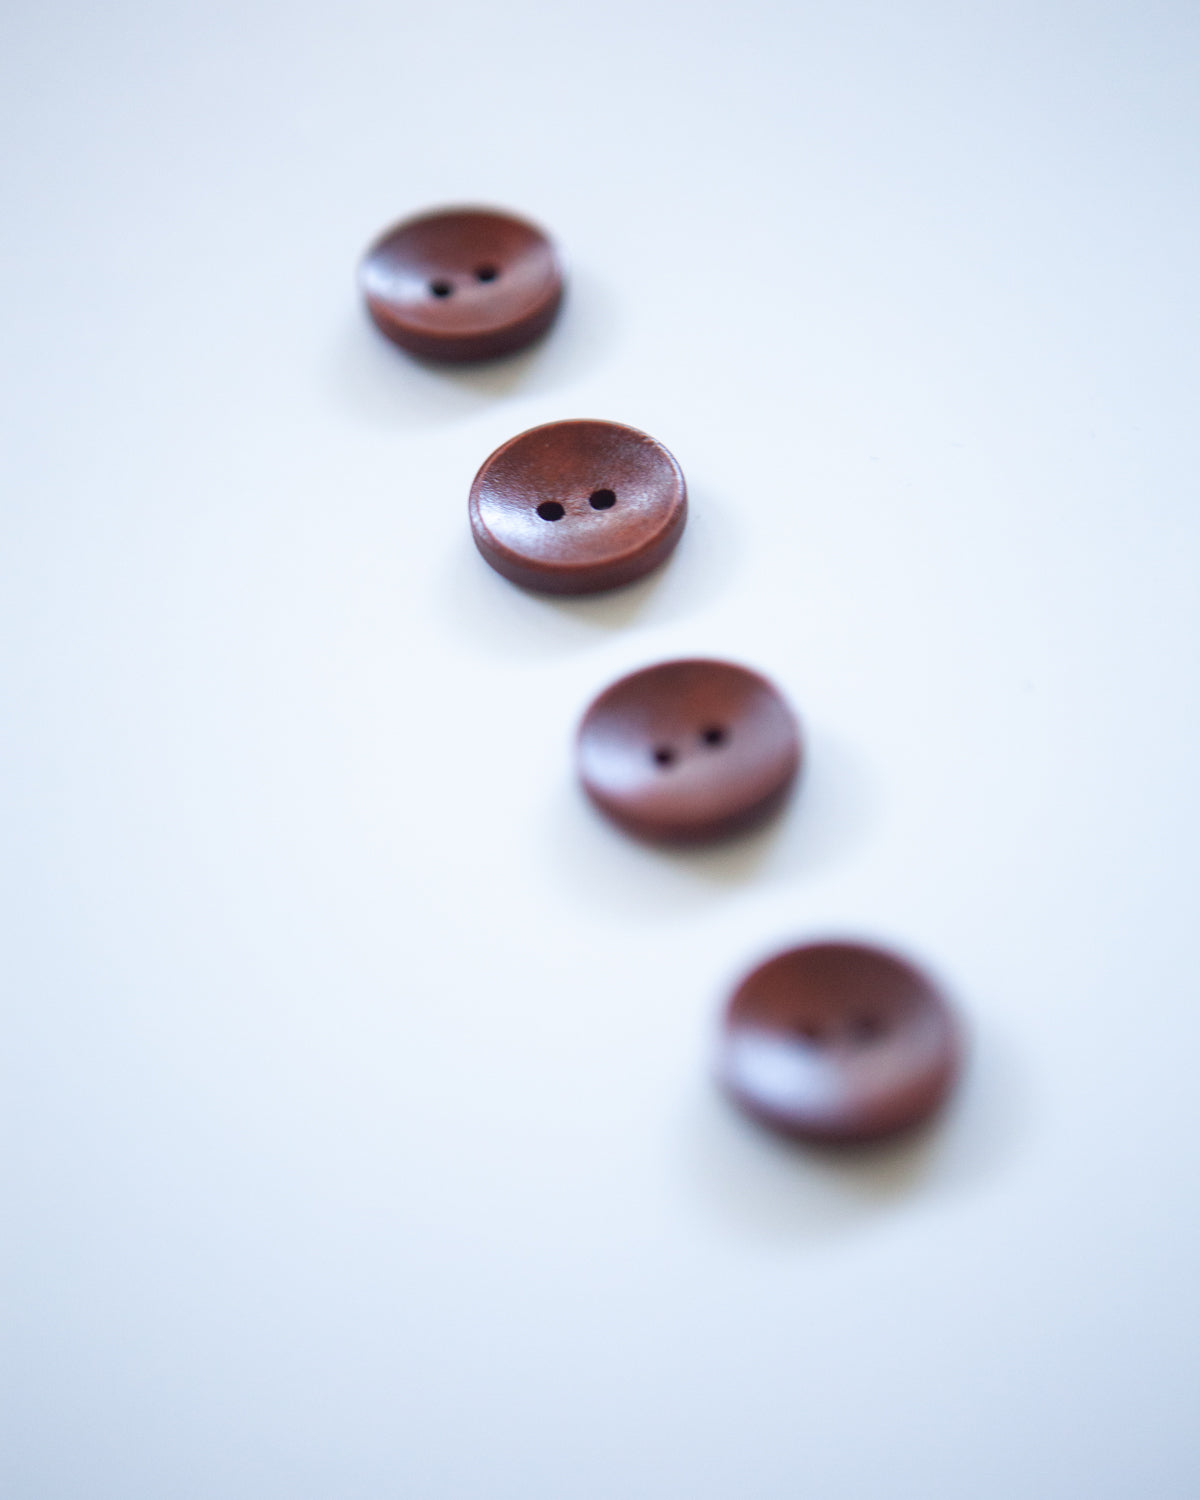 Wooden Buttons Set of 3: Brown Wooden Stitch Buttons ~ Large